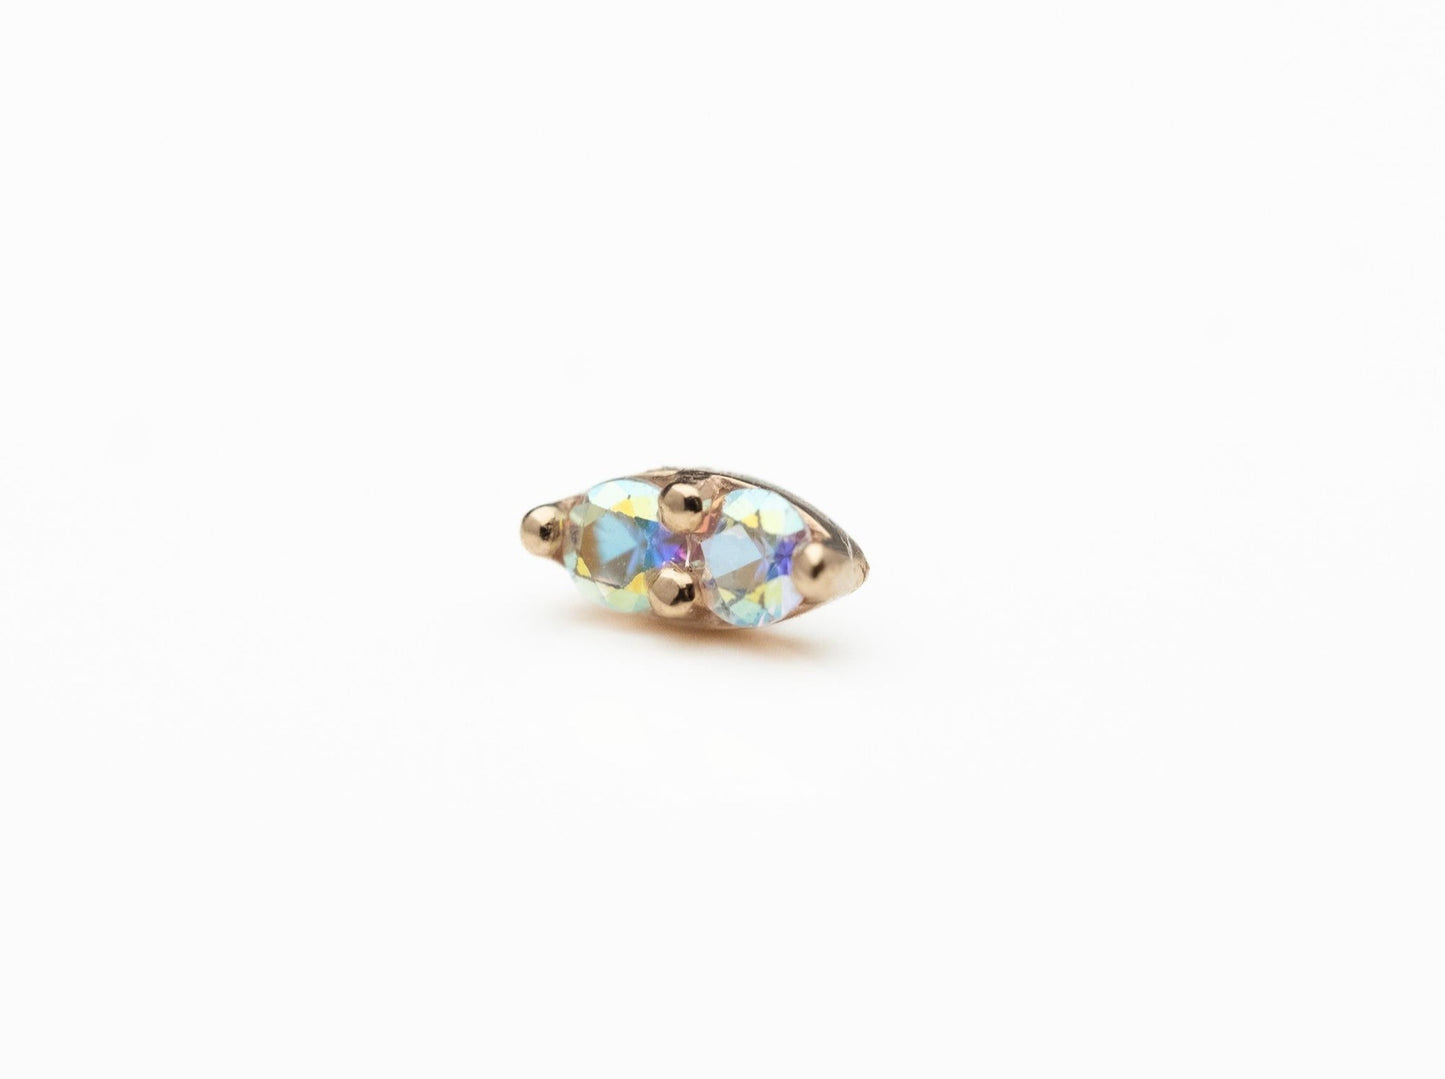 Marquise Illusion with Mercury Mist Topaz in 14k Rose Gold Threaded (16g) by BVLA